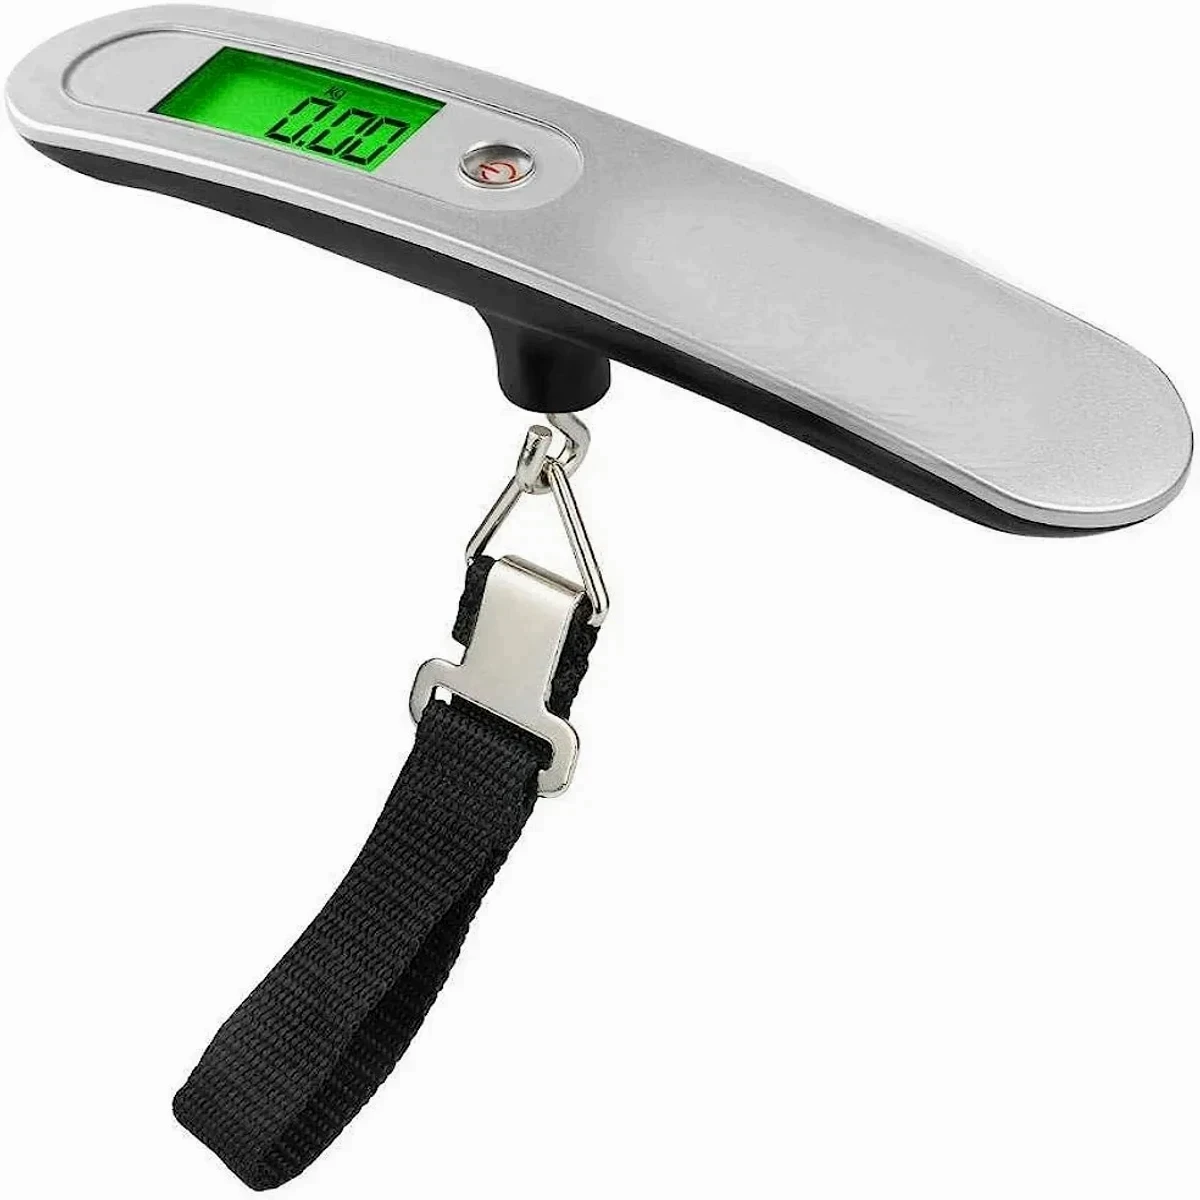 Digital Hanging Weight Scale